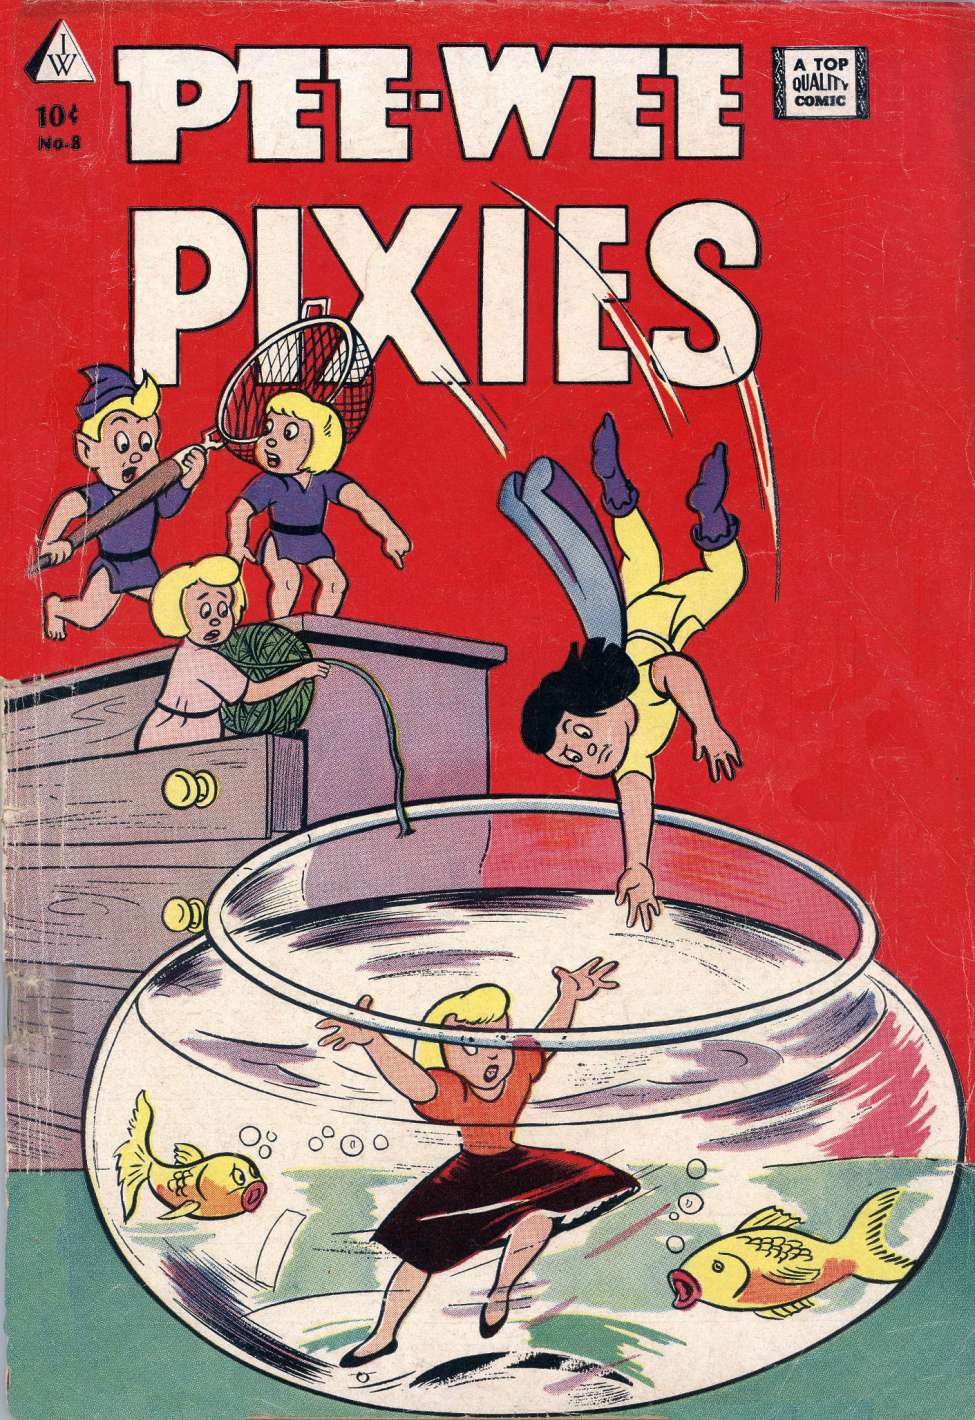 Comic Book Cover For Pee-Wee Pixies 8